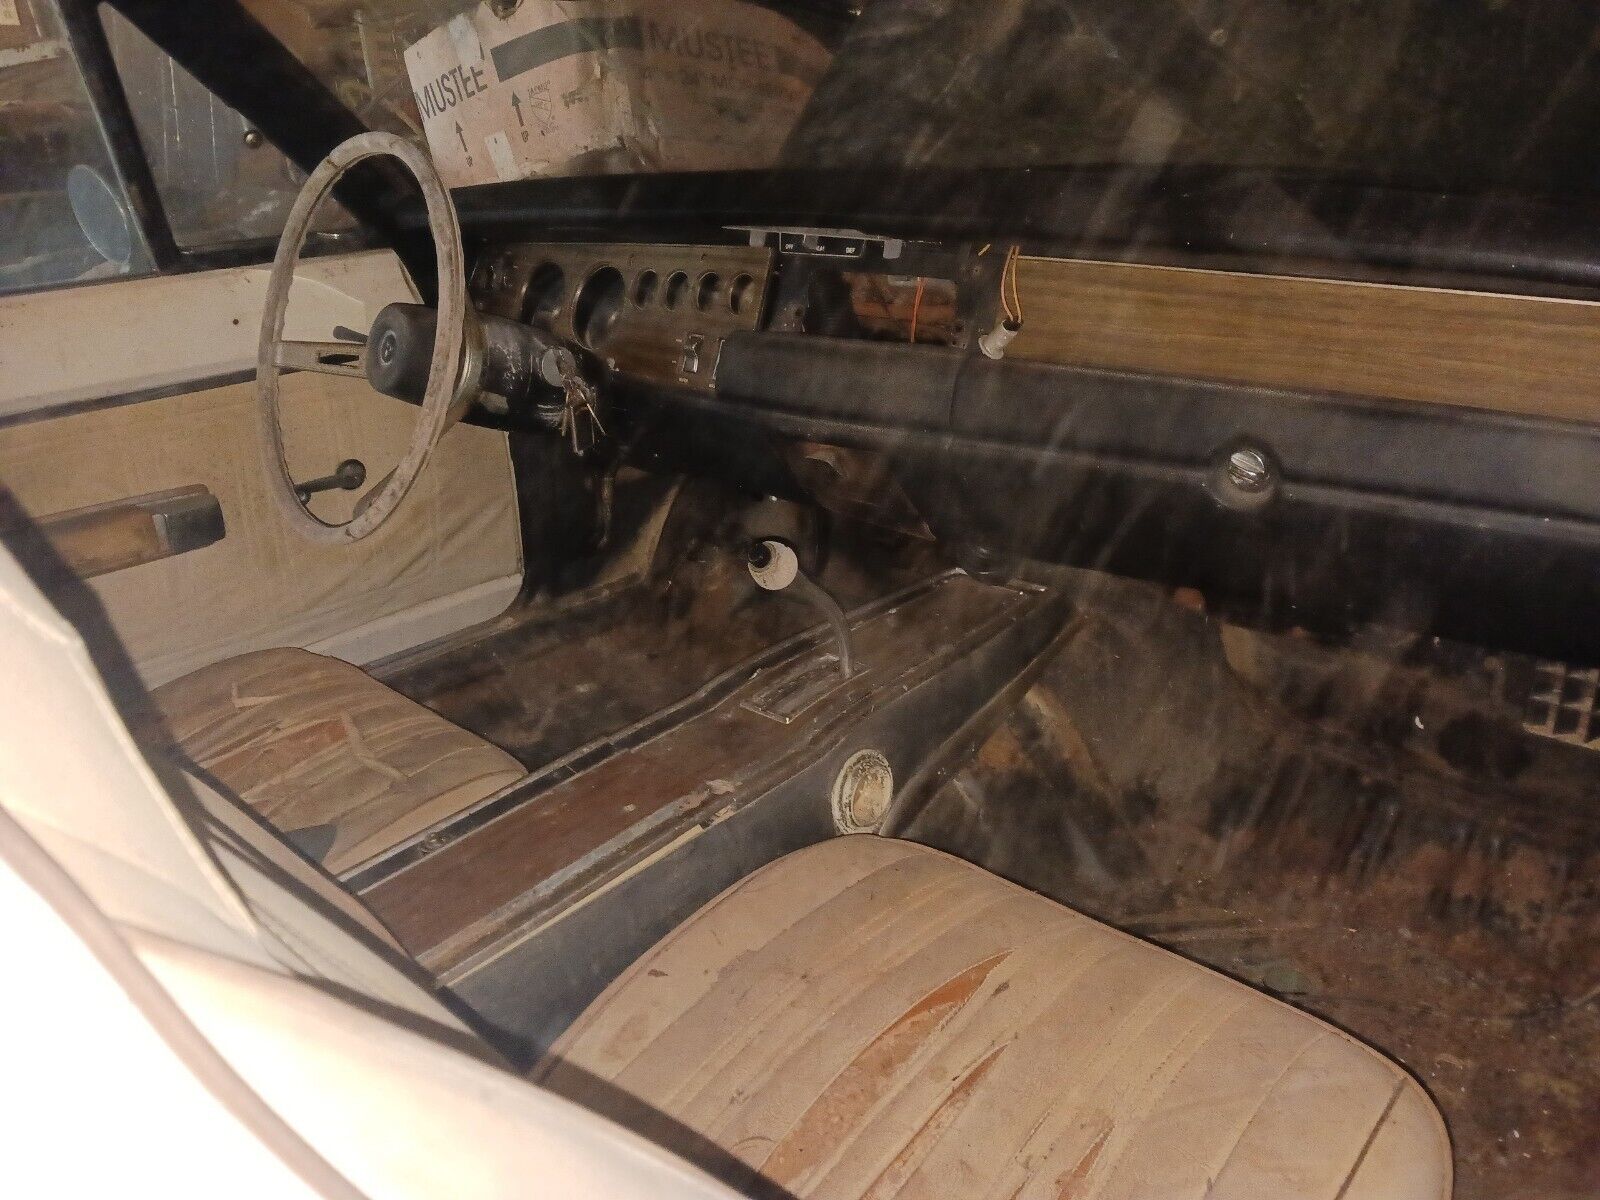 The 1970 Dodge Super Bee Barn Find